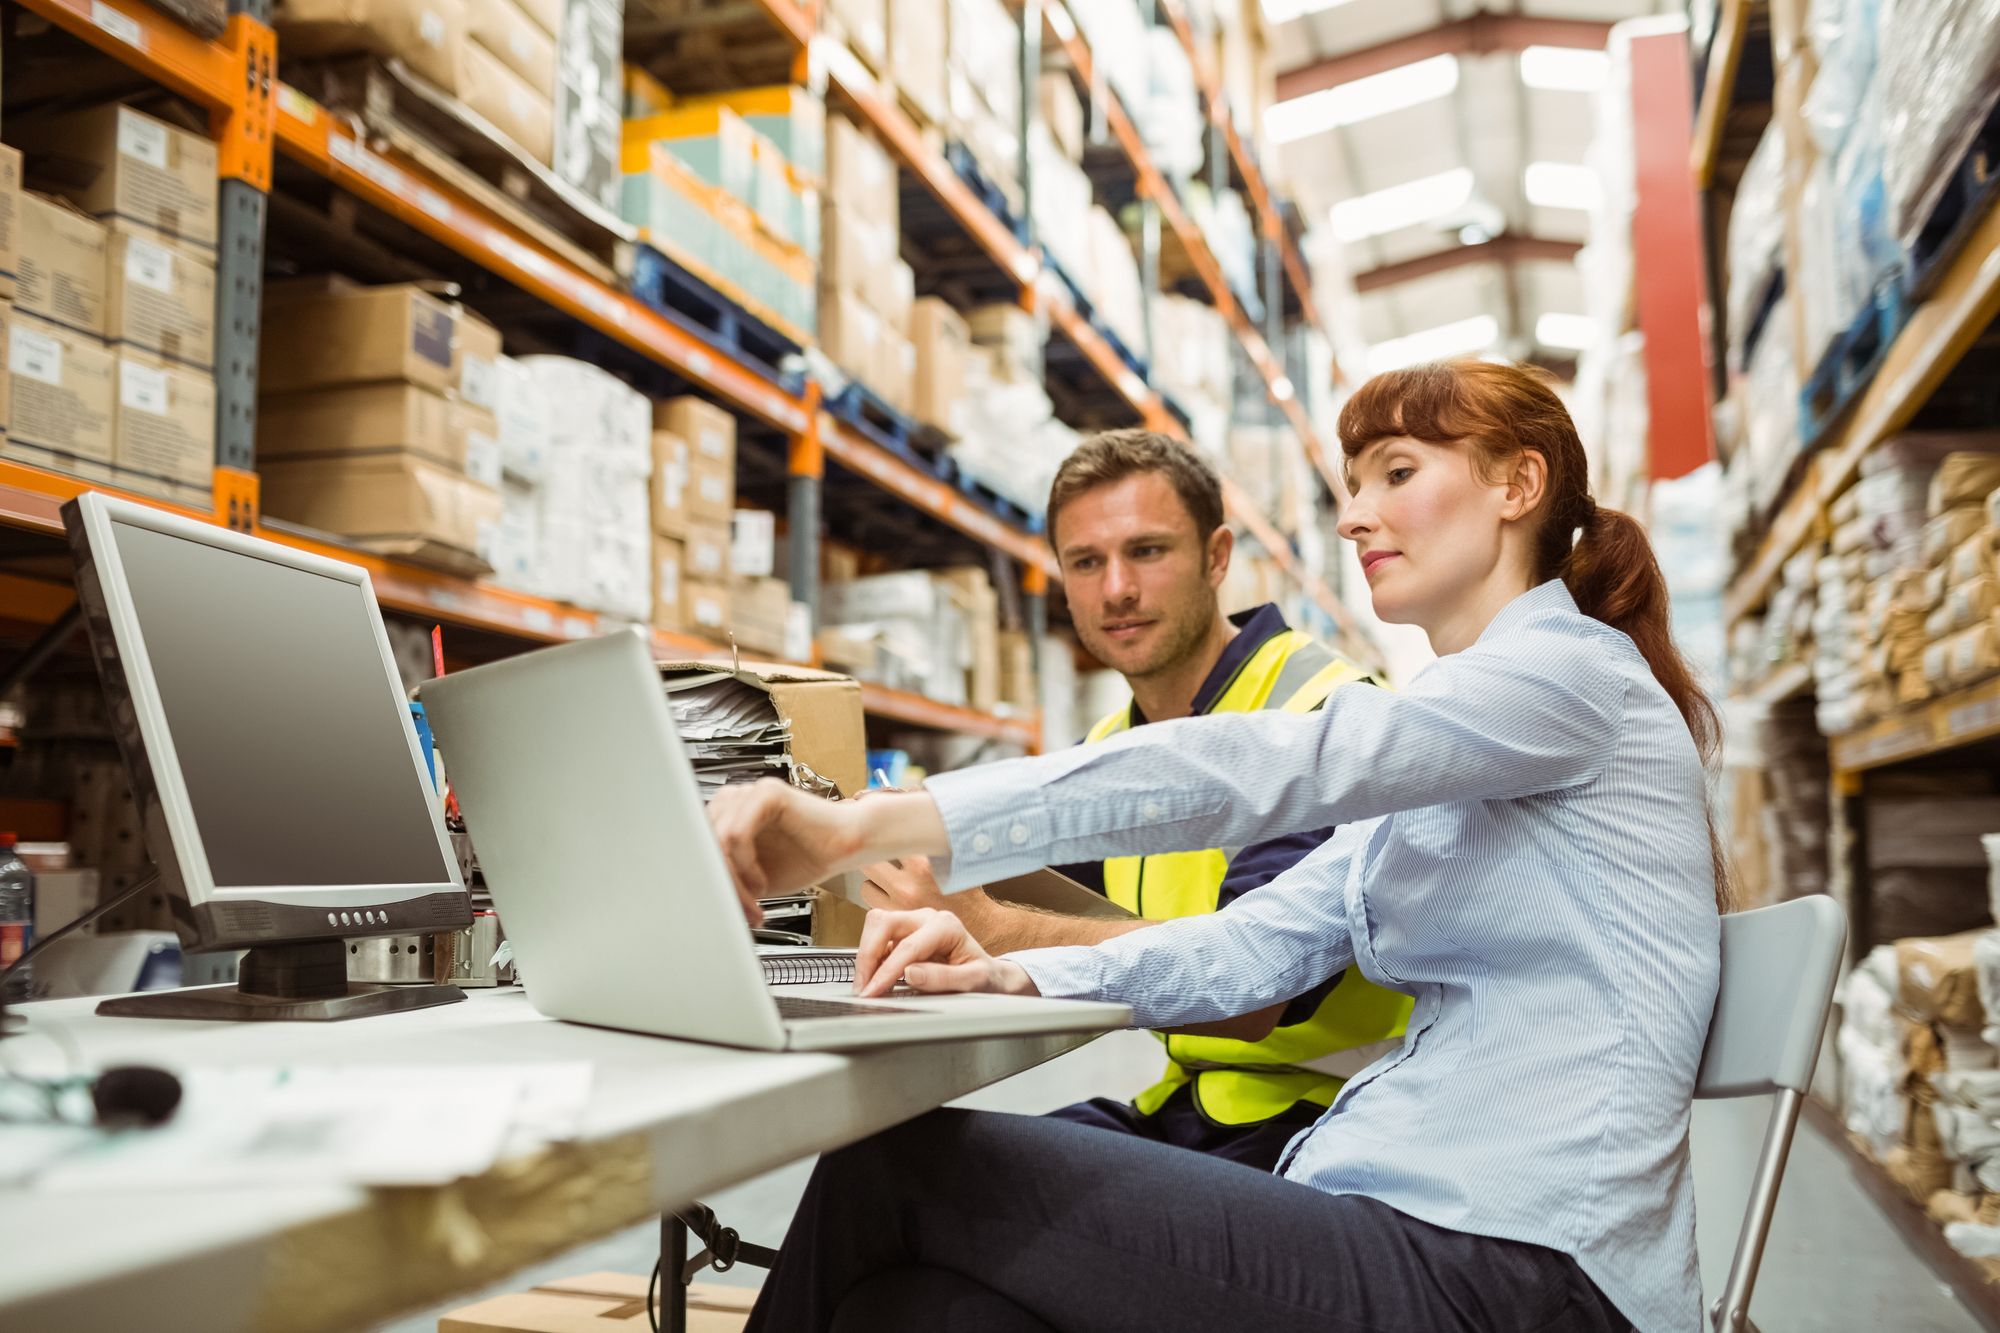 A woman showing a warehouse worker something on a laptop screen inside a warehouse